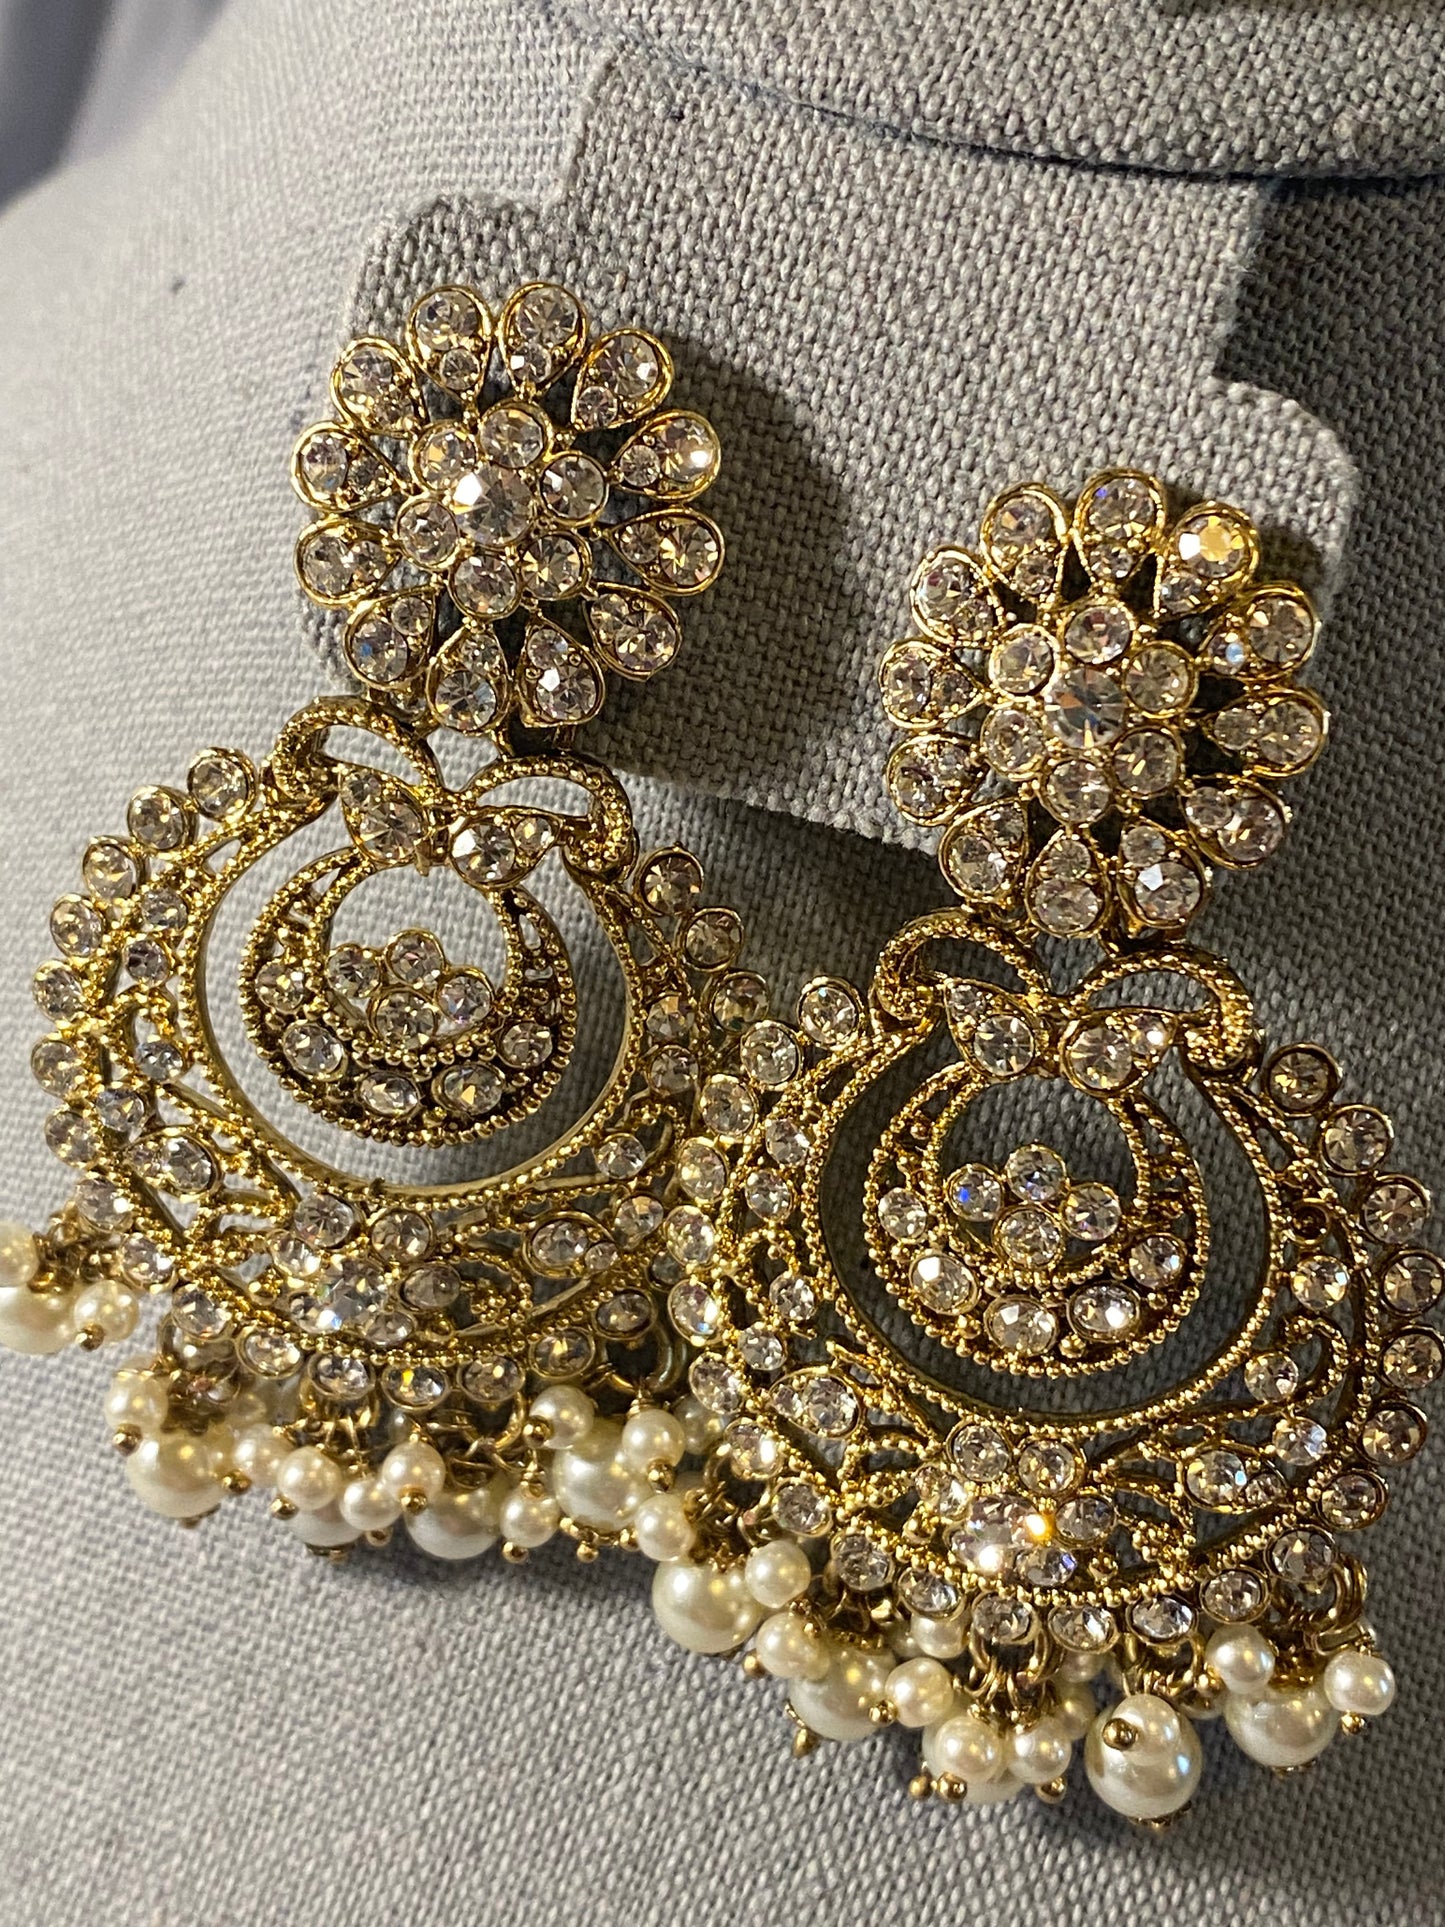 New Jewelry: 3 Piece Gold Plated Crystal Wedding Set